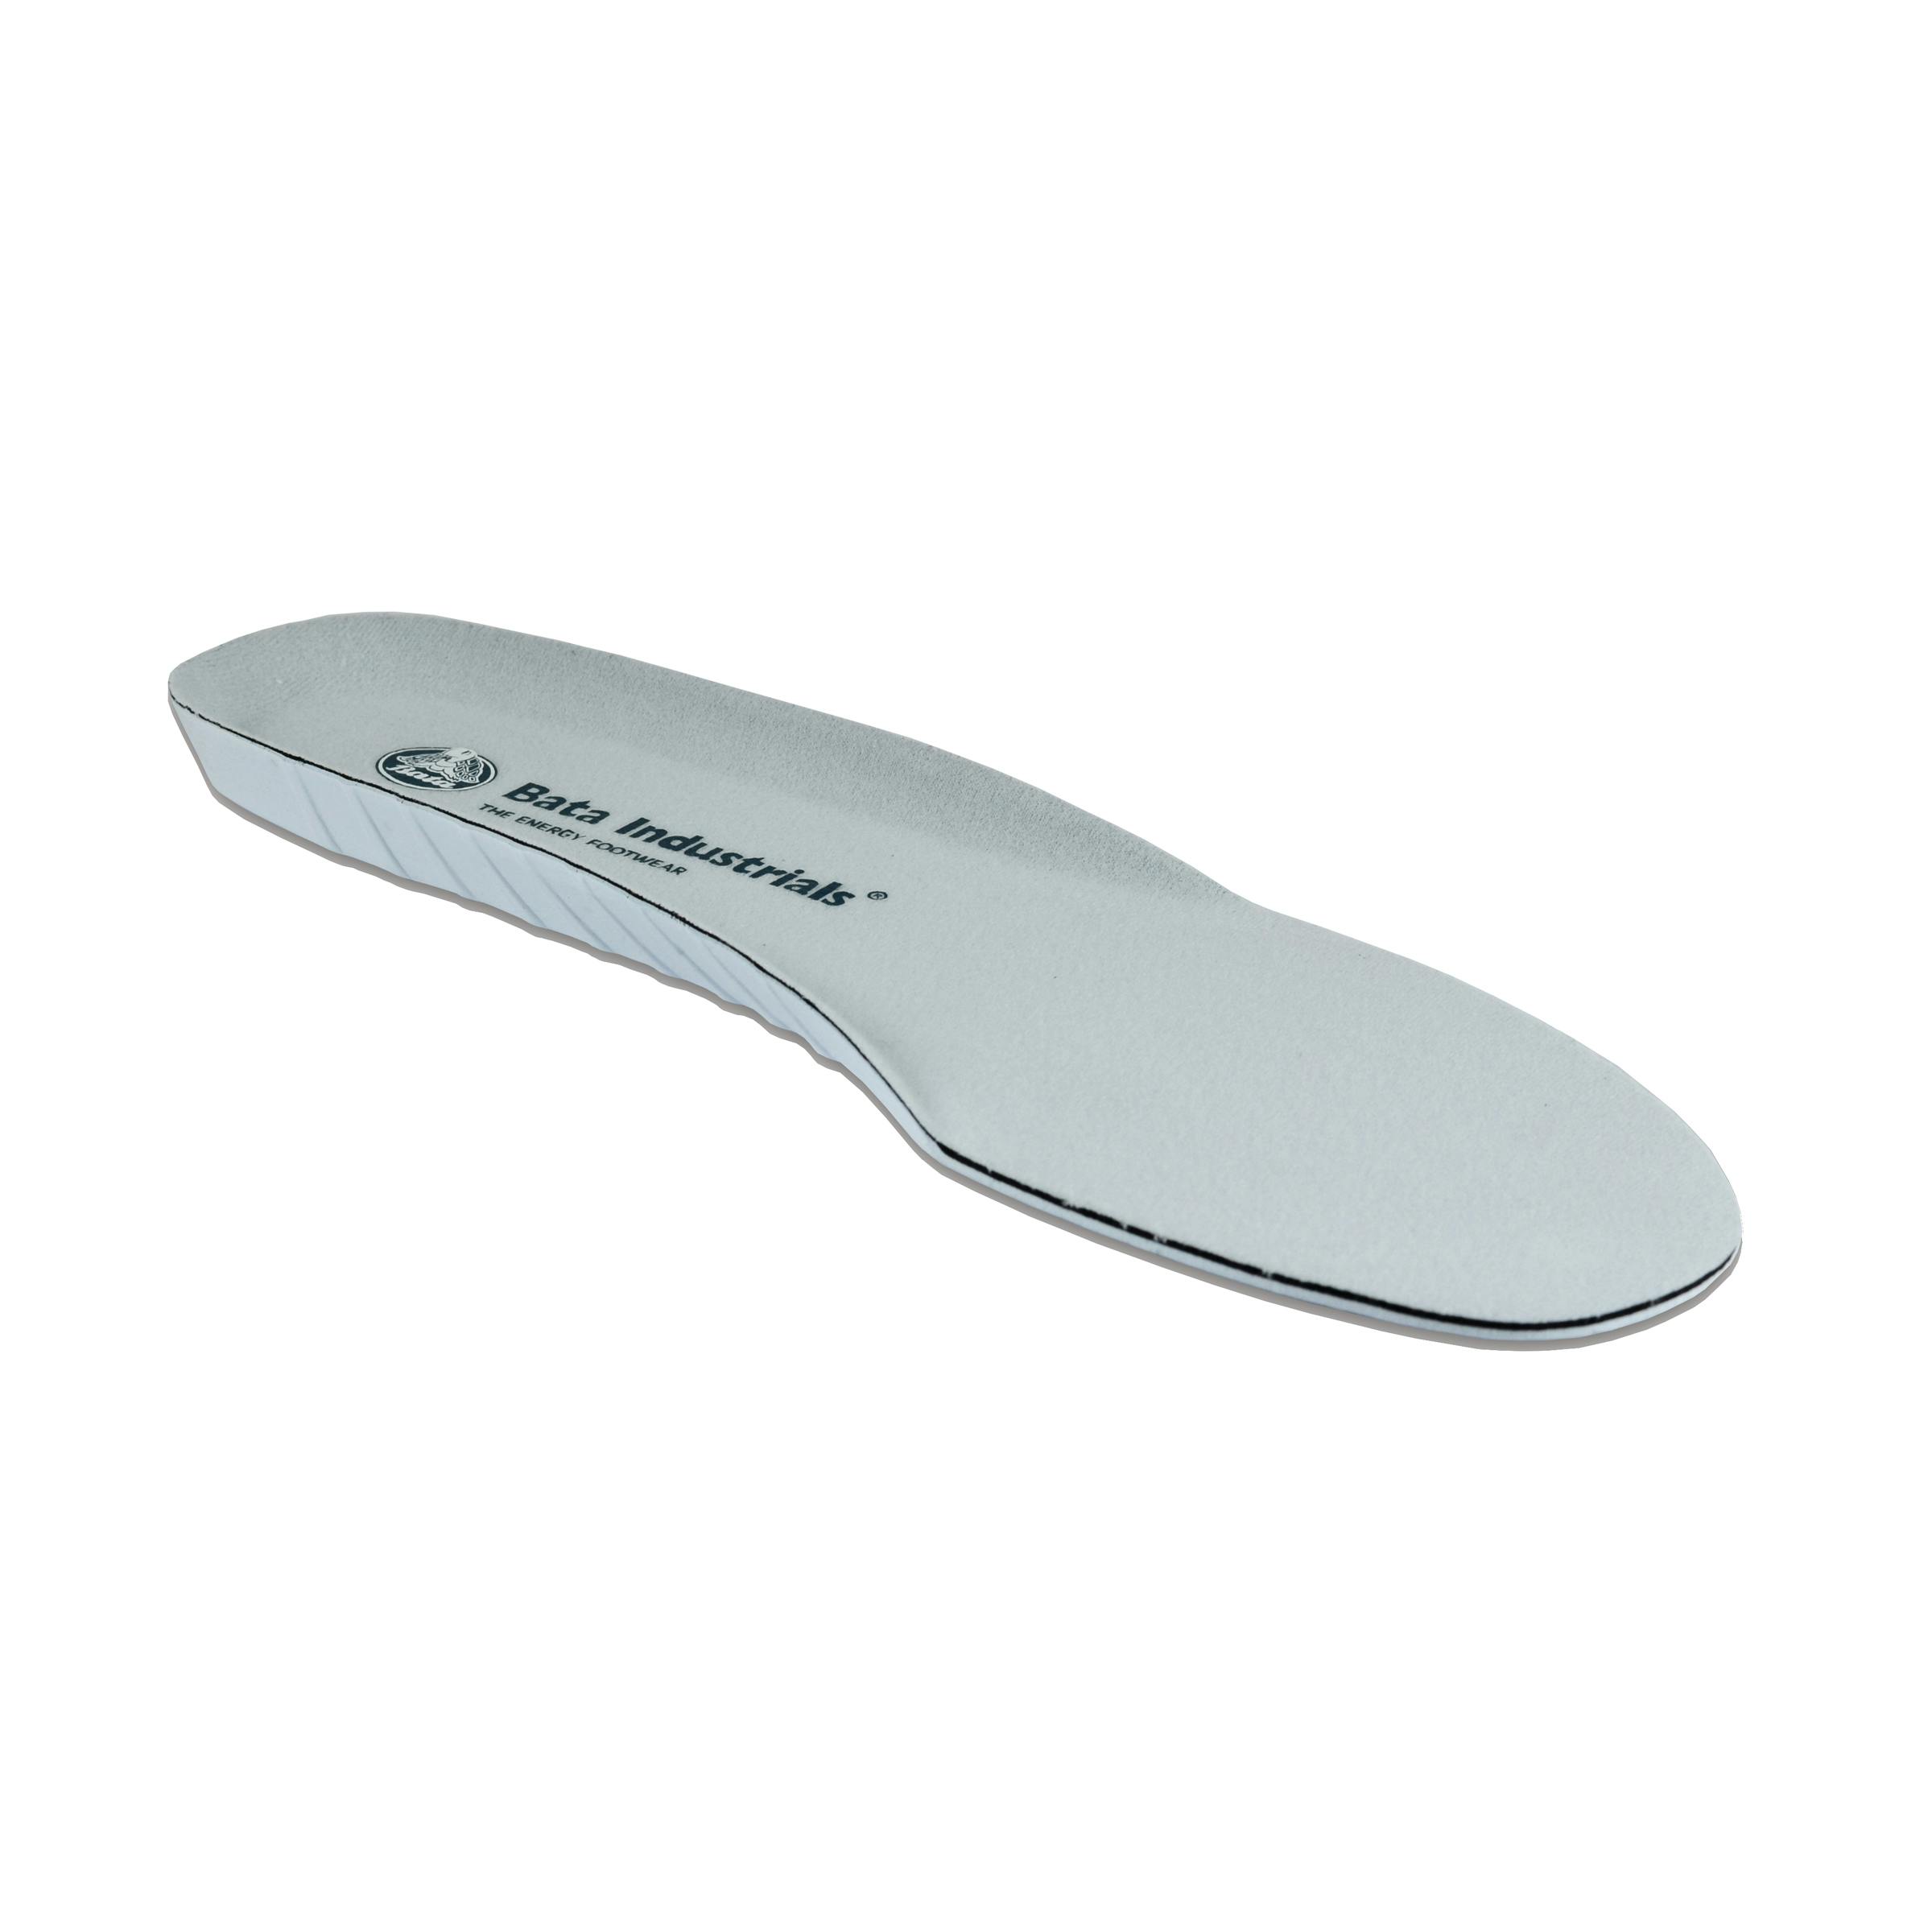 Bata Industrials Insole - White Footbed Comfort Insole 3-5 - Small (Accessories Insoles )